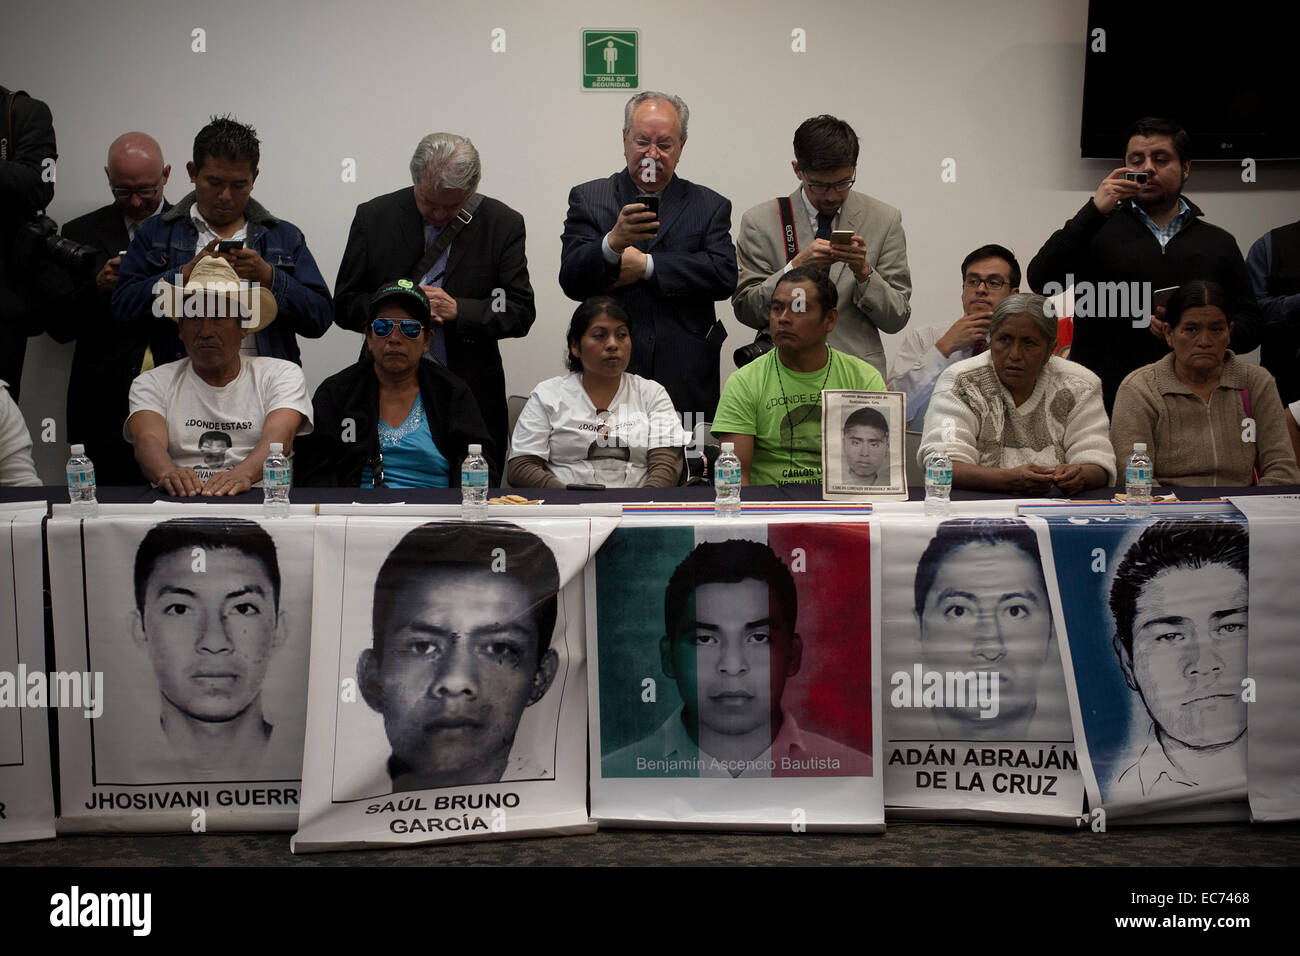 Mexico City, Mexico. 9th Dec, 2014. Family members of the students of the Normal Rural School of Ayotzinapa that went missing in Iguala, Guerrero, take part in a meeting in the Republic's Senate, in Mexico City, capital of Mexico, on Dec. 9, 2014. According to local press, the family members, through a document, asked the Senate to demand the federal authorities to accelerate the investigation of the search of their offspring. © Alejandro Ayala/Xinhua/Alamy Live News Stock Photo